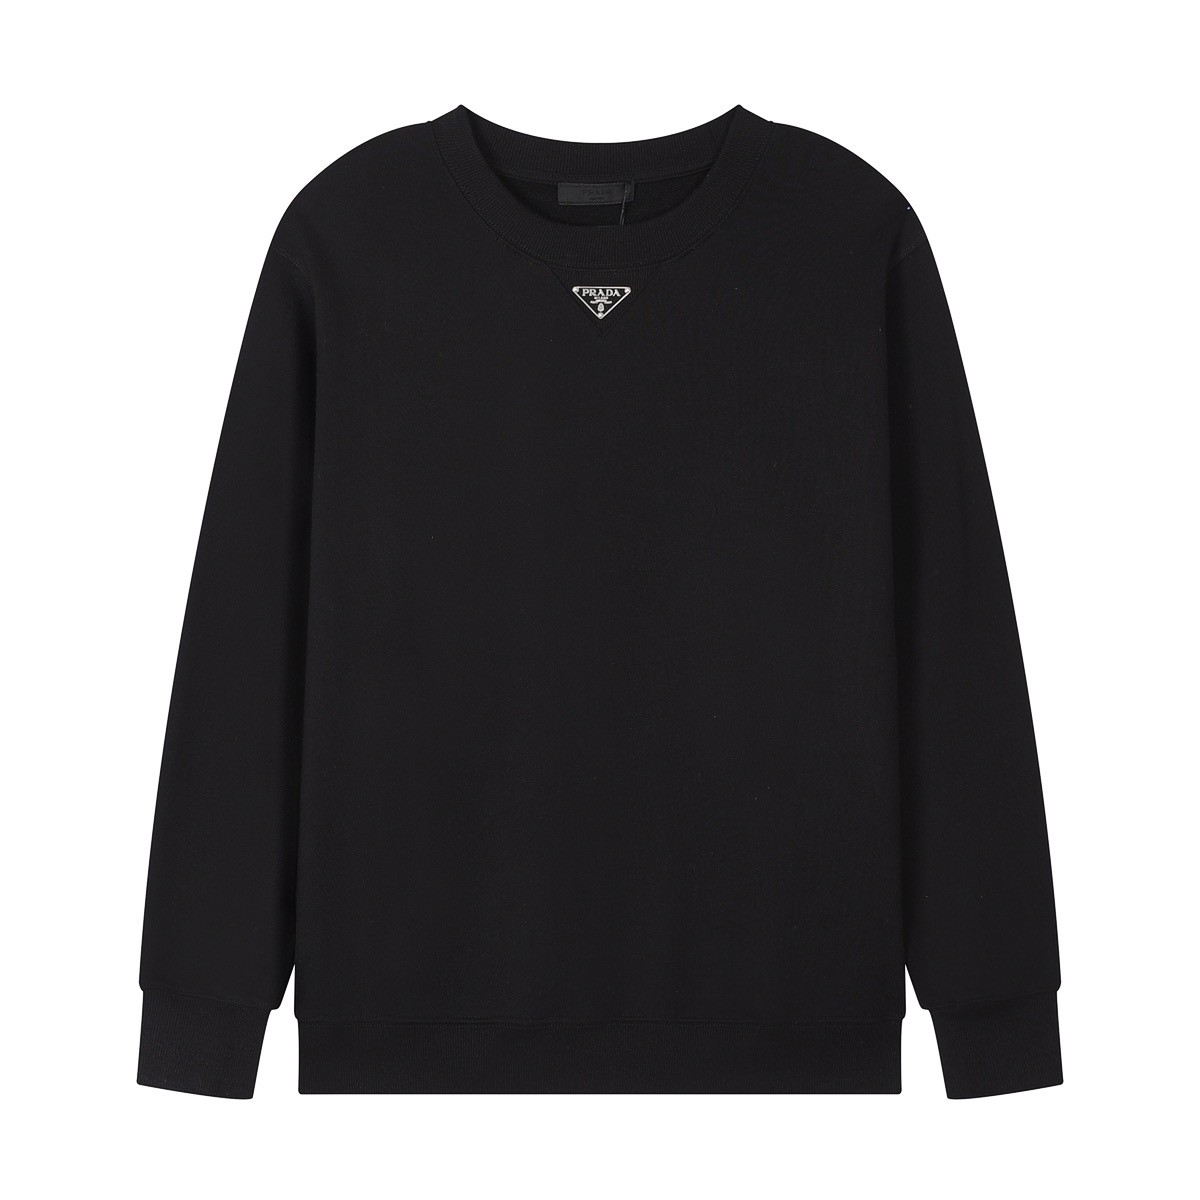 Prada Clothing Sweatshirts Top Quality Website
 Black White Fall/Winter Collection